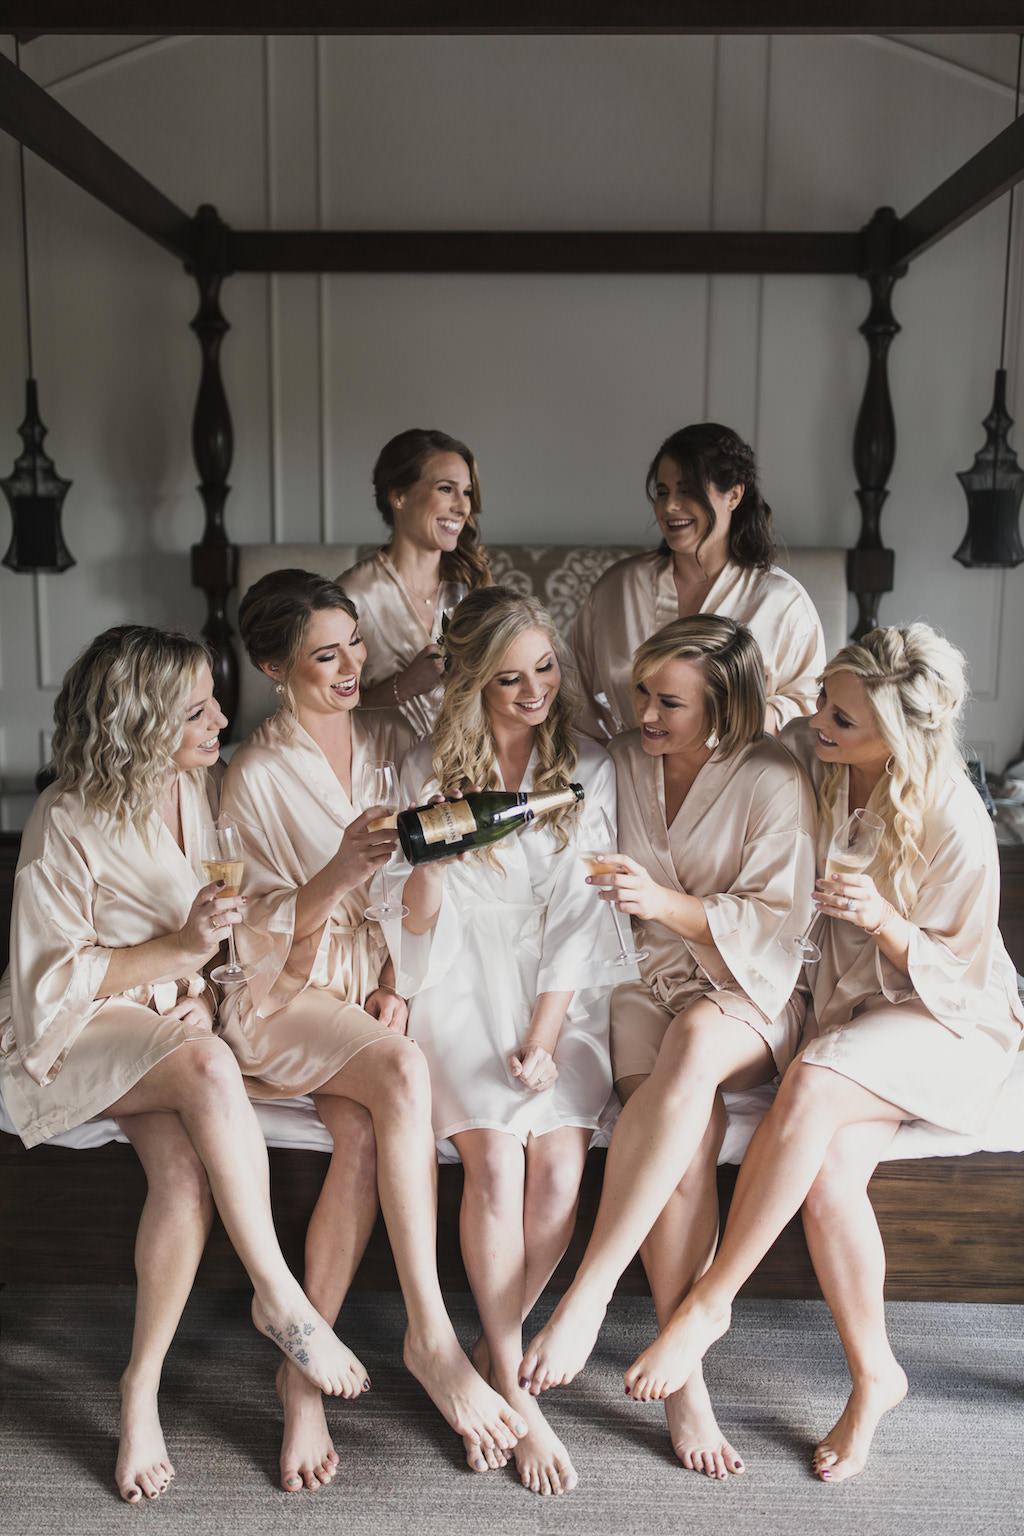 Florida Bride and Bridesmaids Getting Ready Wedding Portrait Drinking Champagne in Silk Beige Robes | Tampa Bay Wedding Hair and Makeup Artist Michele Renee the Studio